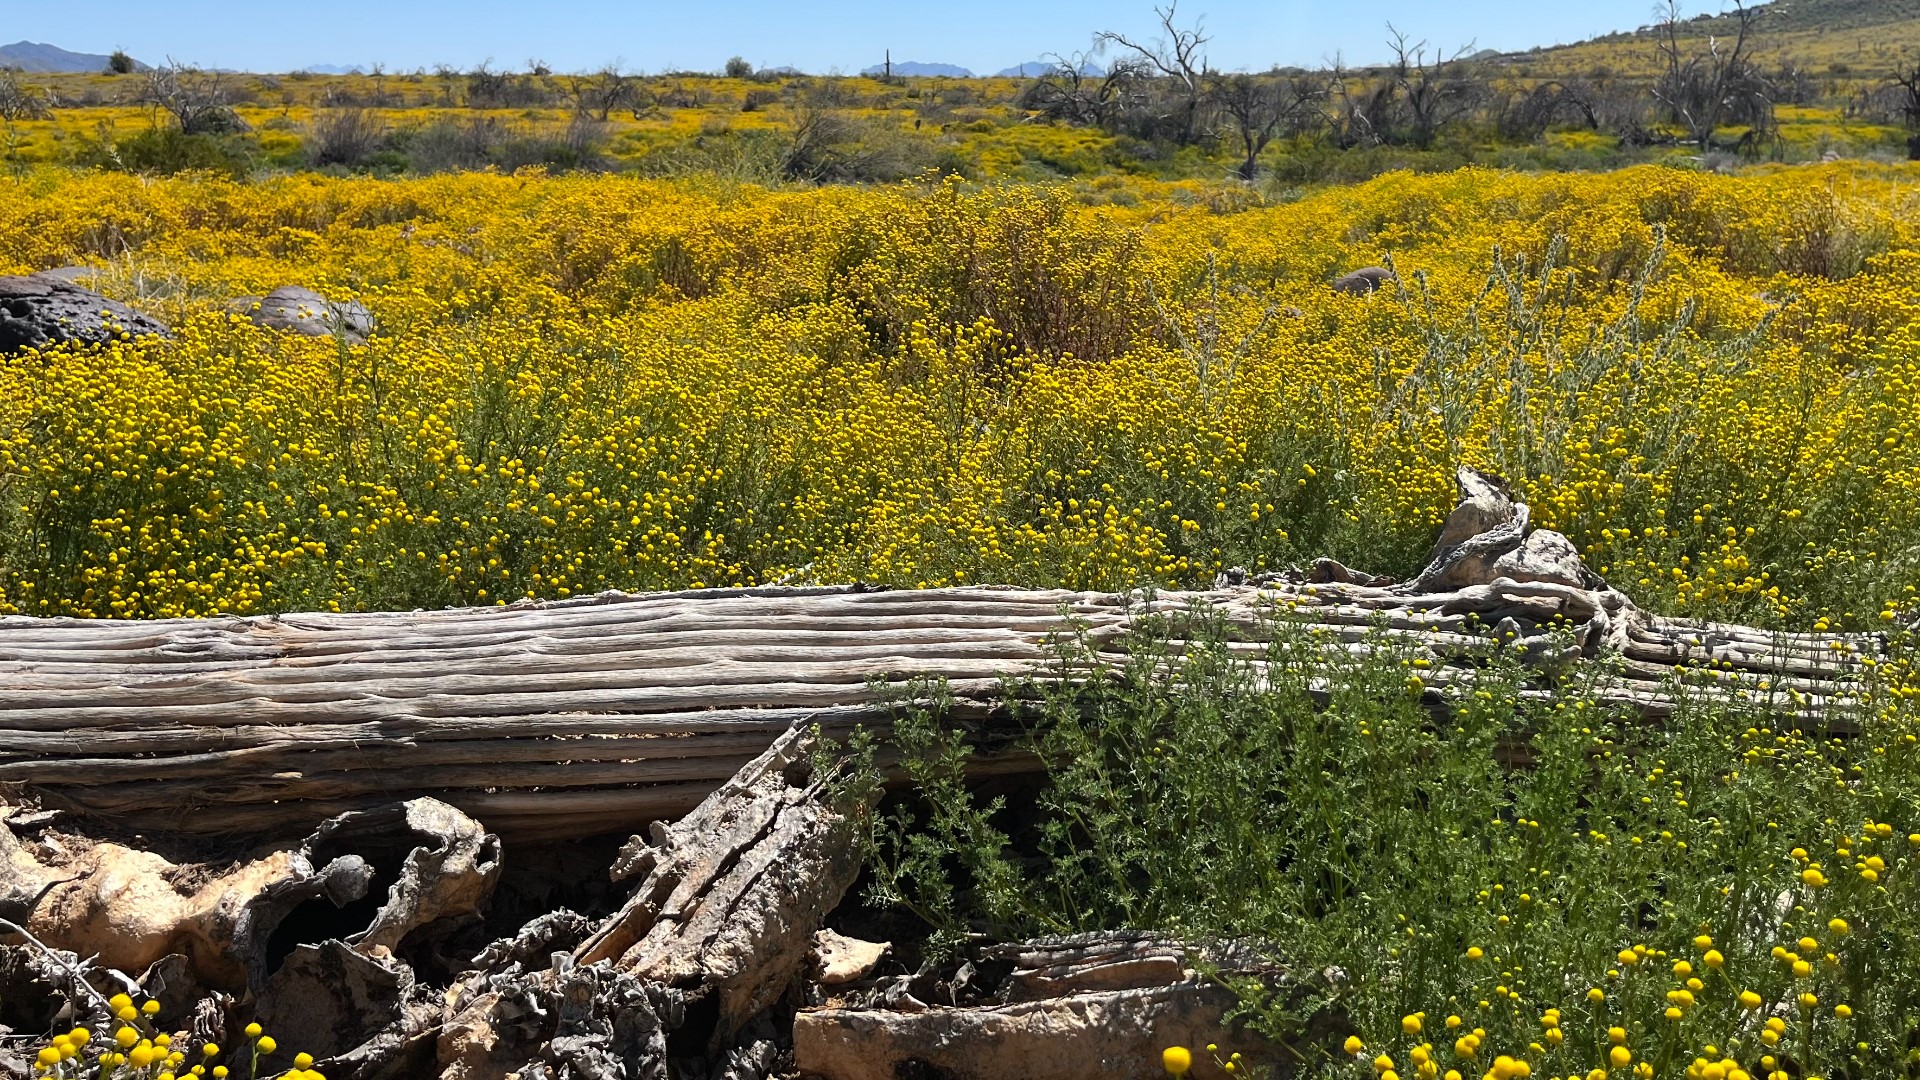 Stinknet or stinkweed is an invasive species taking root across Phoenix and Arizona. Here's what to do if you spot it in your backyard.